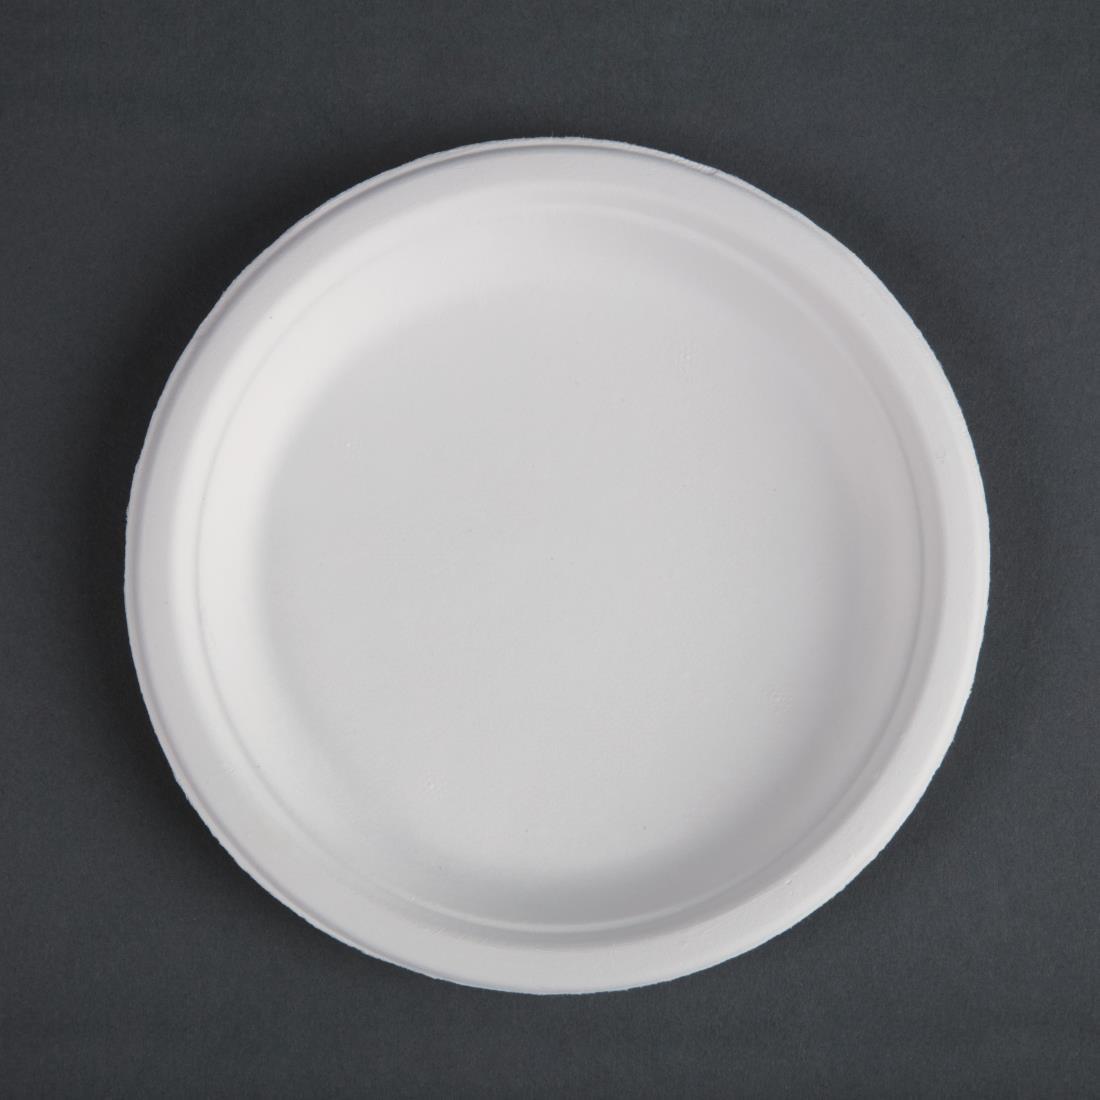 Fiesta Compostable Bagasse Plates Round 179mm (Pack of 50) - CW905  - 1